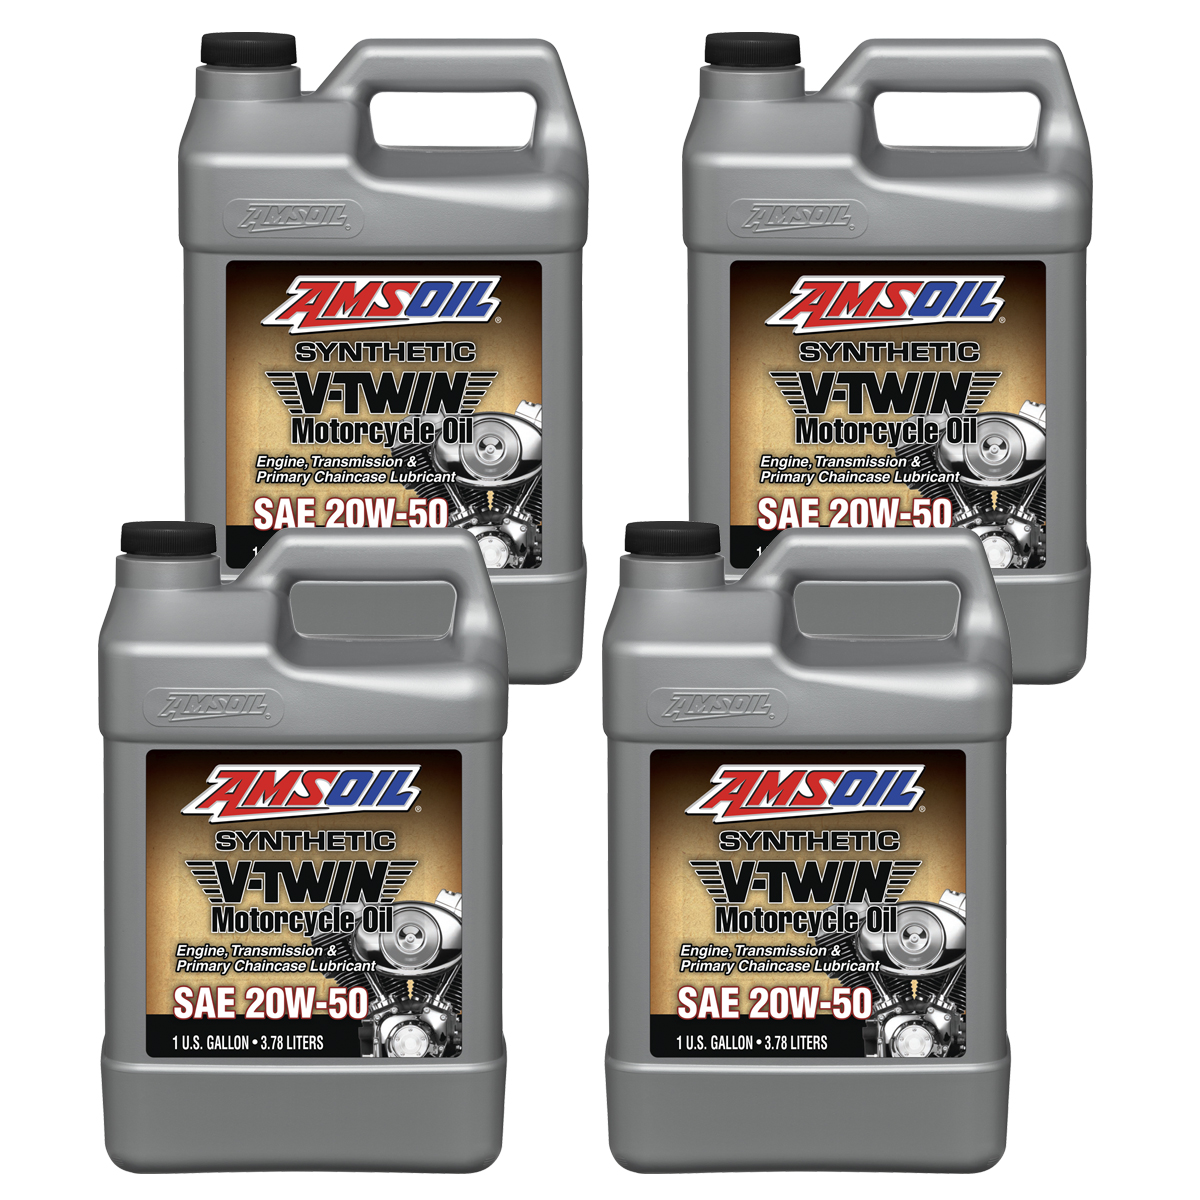 Amsoil 20w-50 Motorcycle Engine Oil one gallon